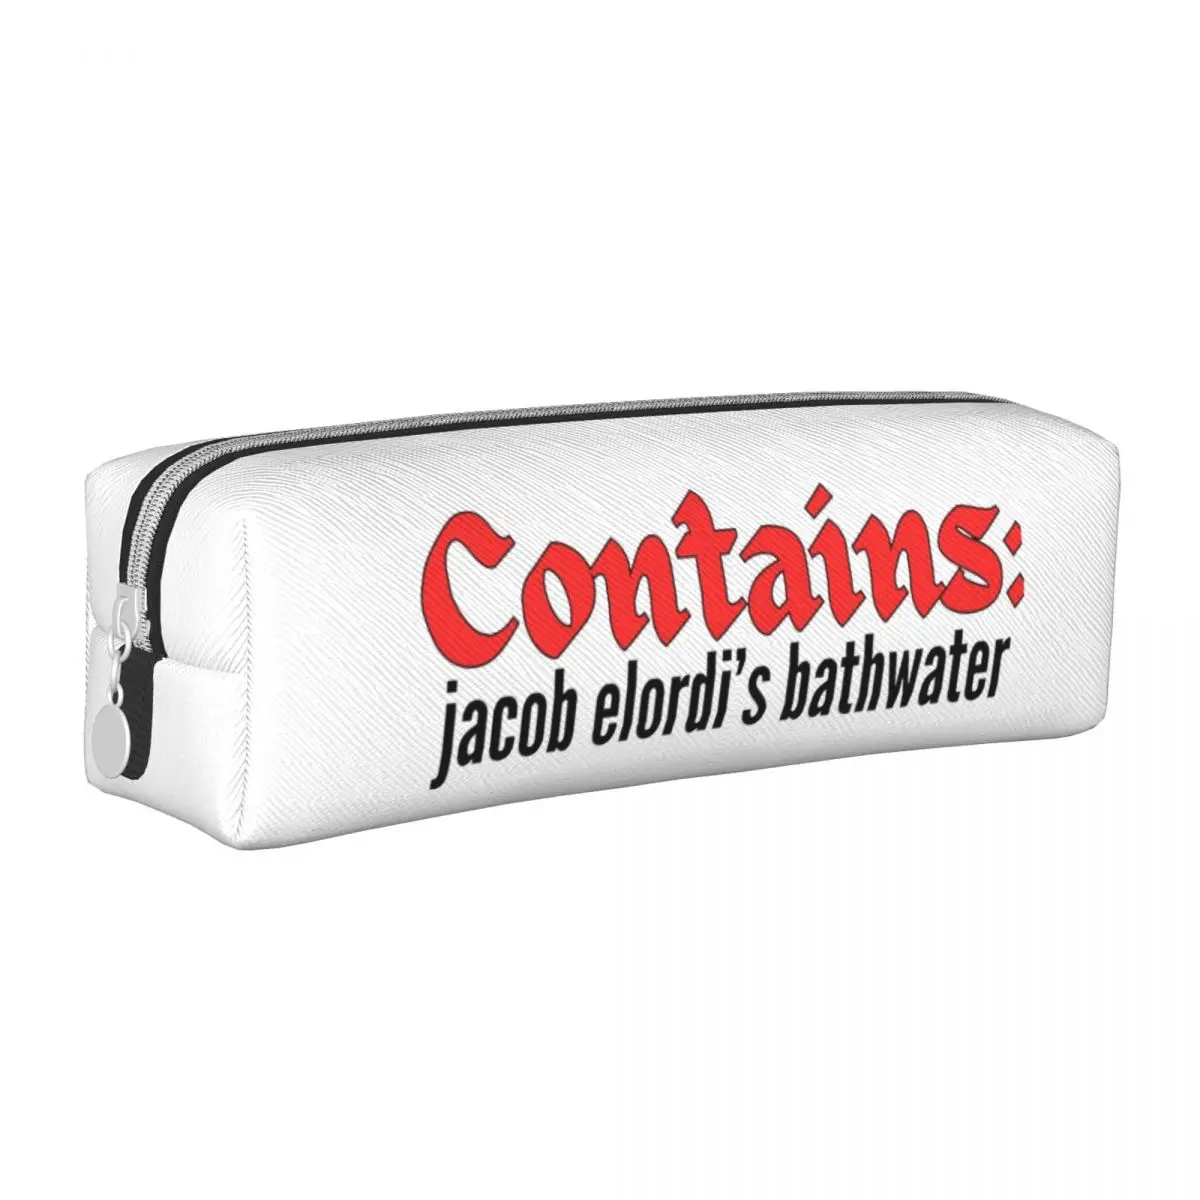 

SALTBURN Jacob Elordi Pencil Cases Pencilcases Pen for Girl Boy Large Storage Bags Students School Zipper Stationery